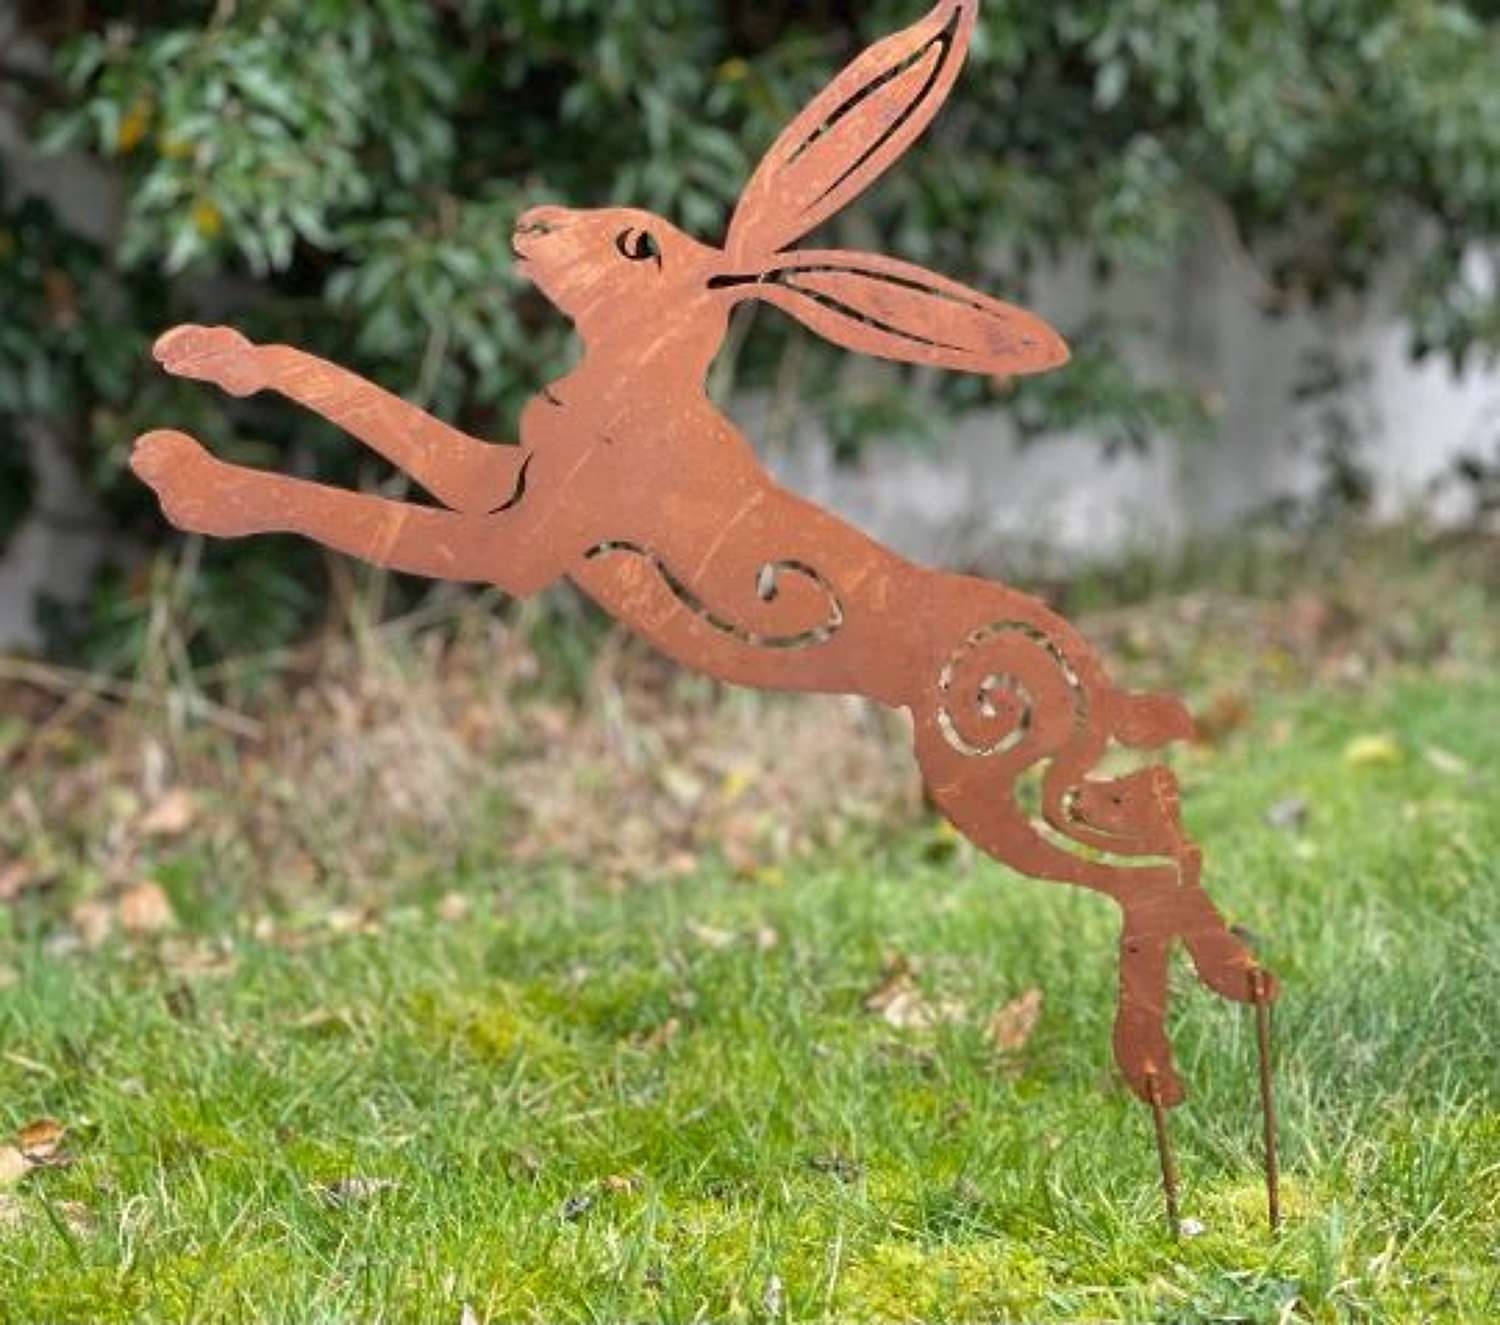 Salvage style leaping garden hare